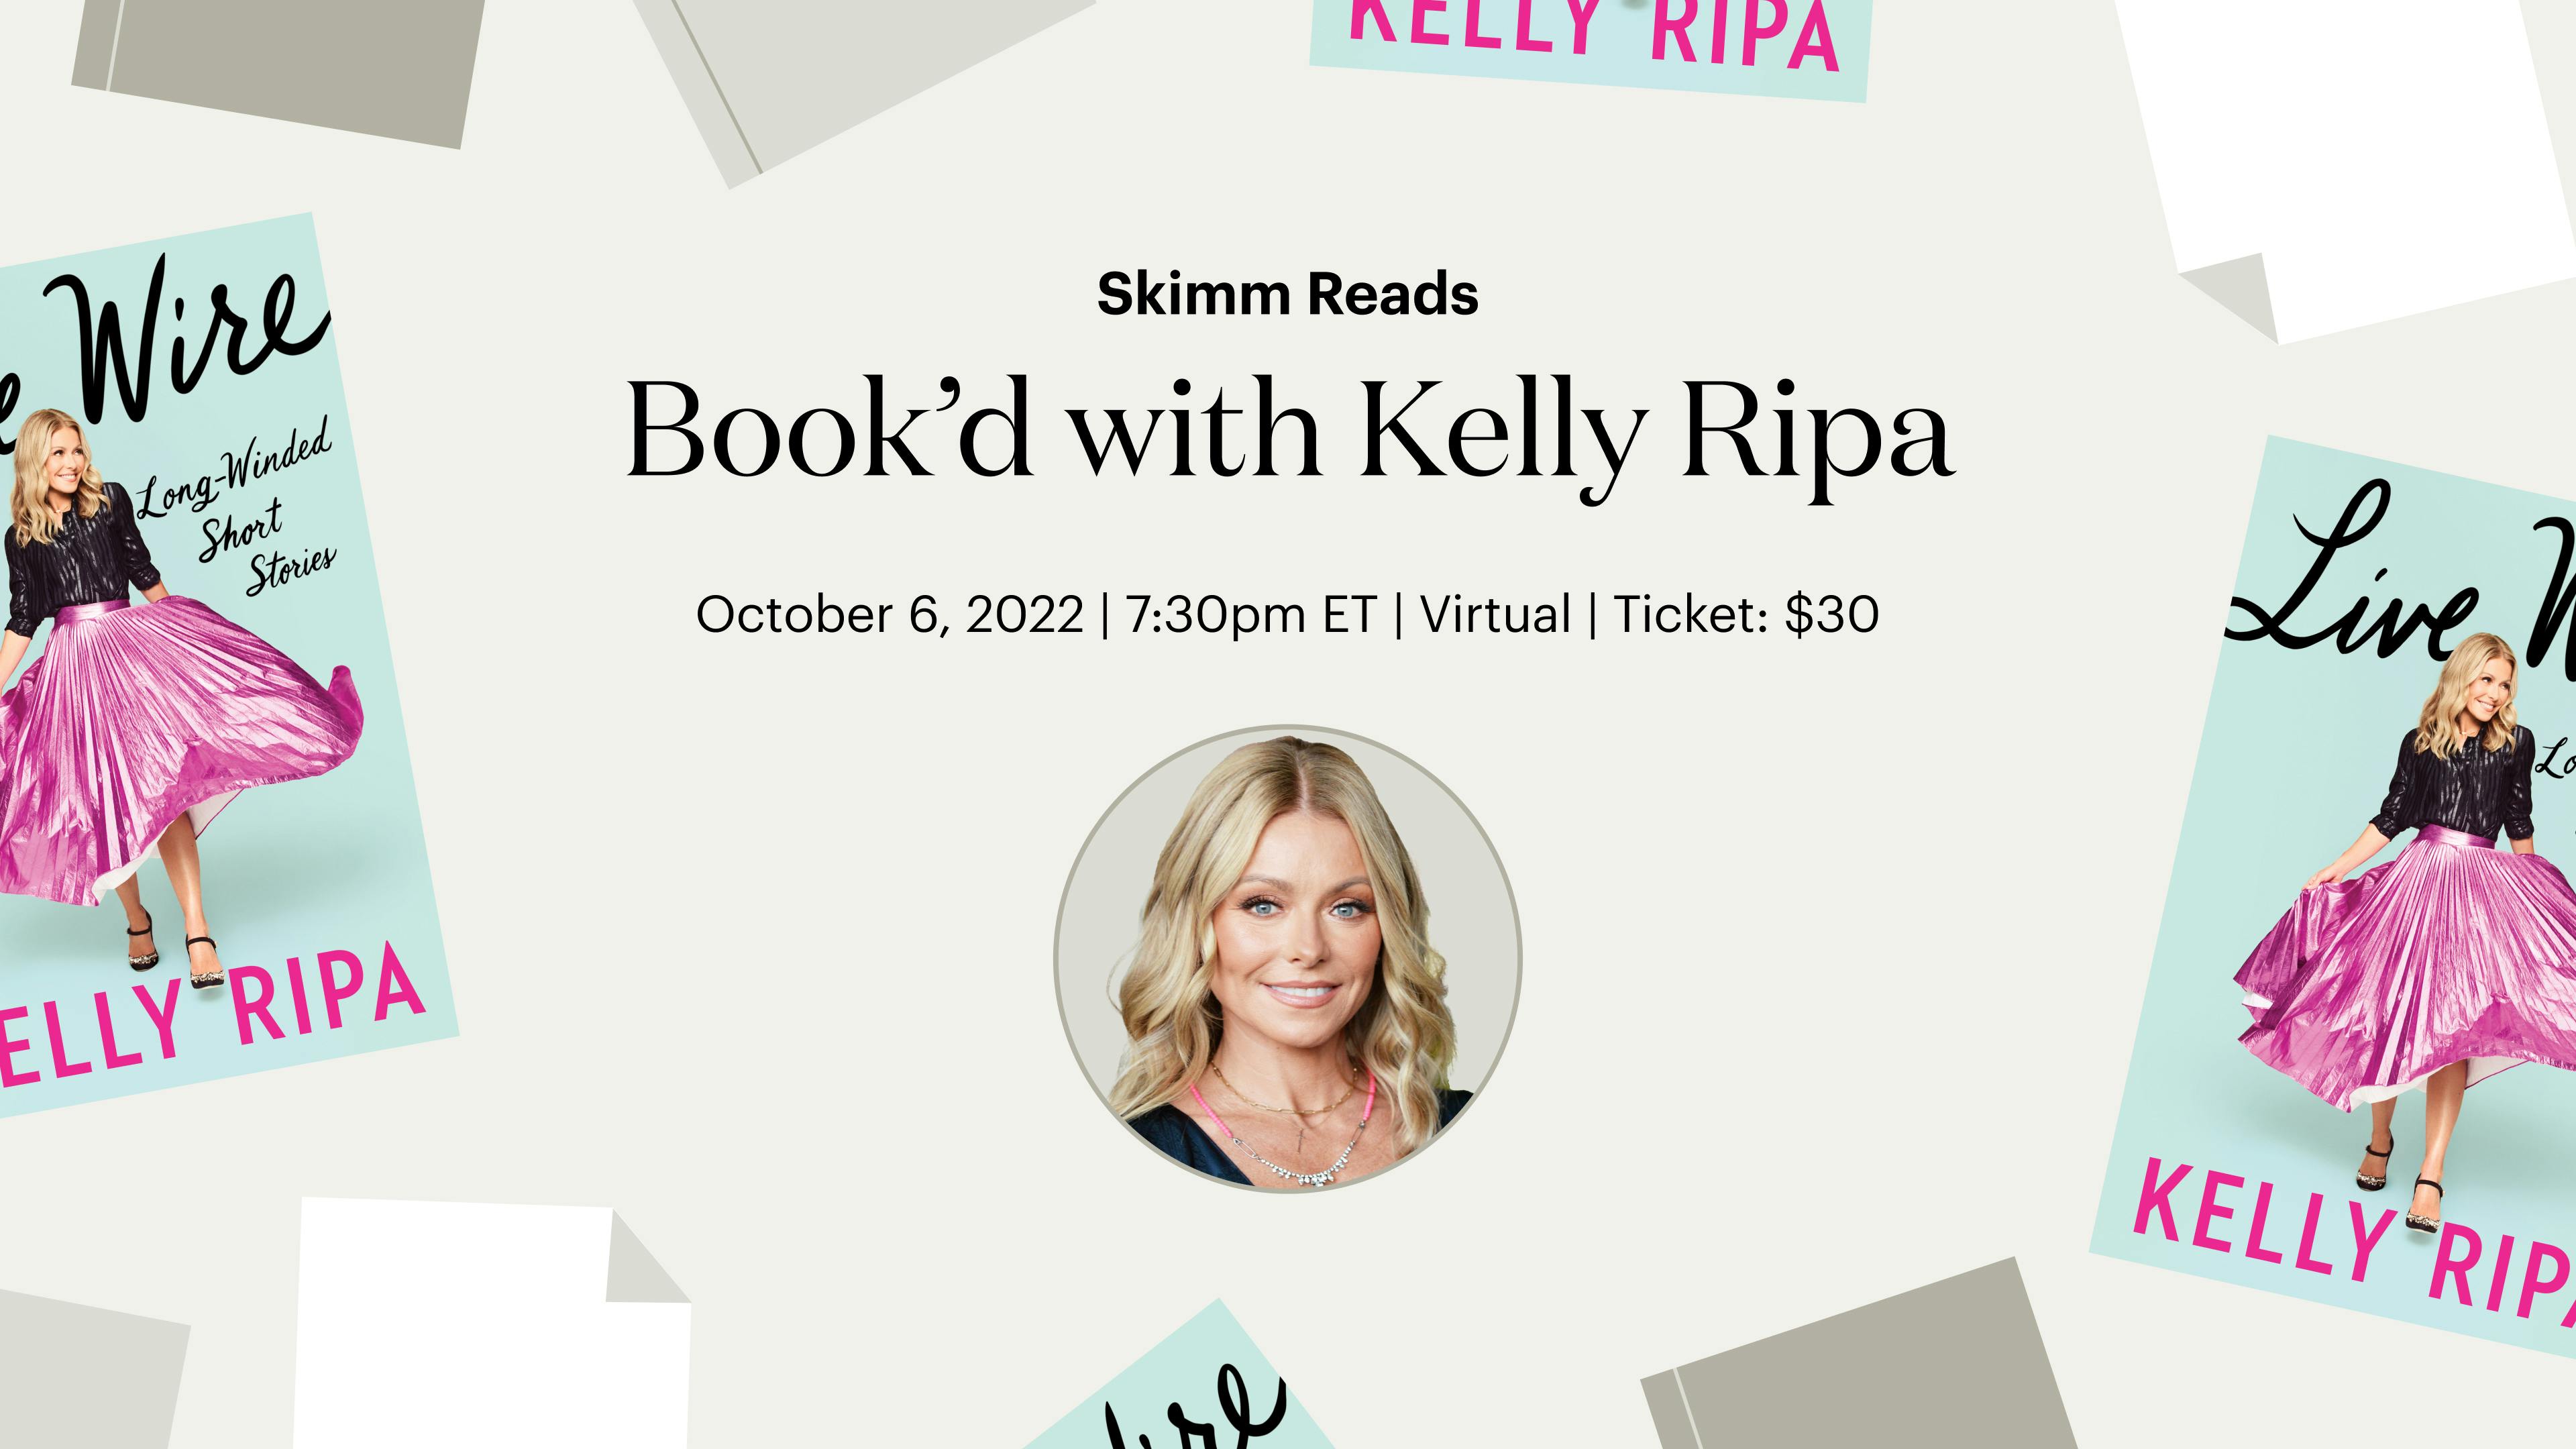 Skimm Reads: Book'd with Kelly Ripa